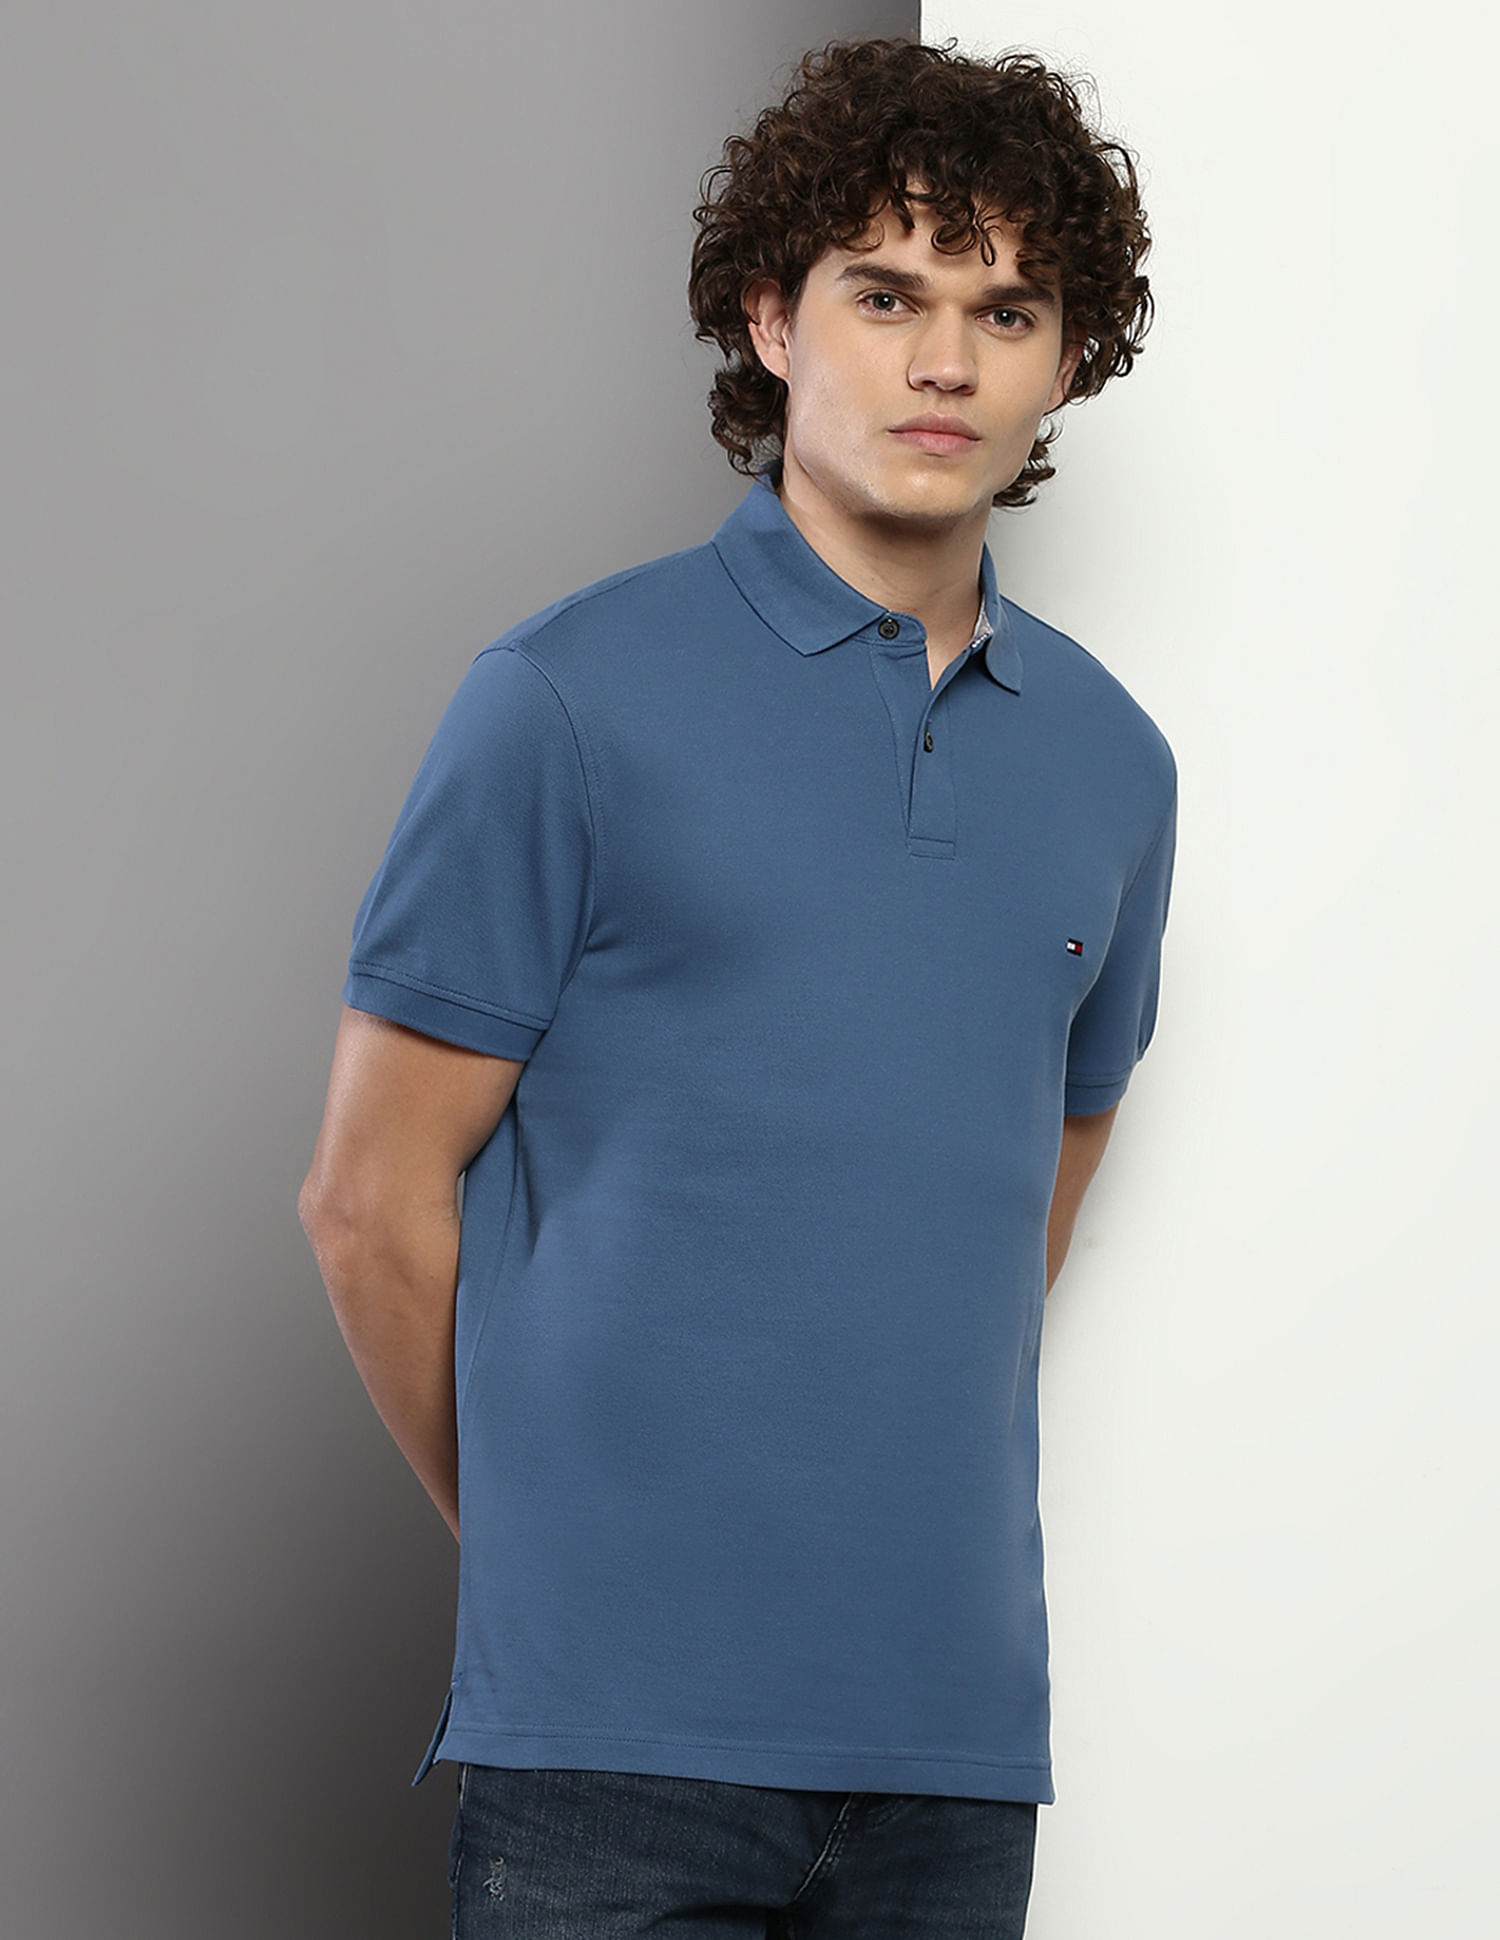 Buy Tommy Hilfiger 1985 Regular Fit Pique Polo Shirt | Poloshirts